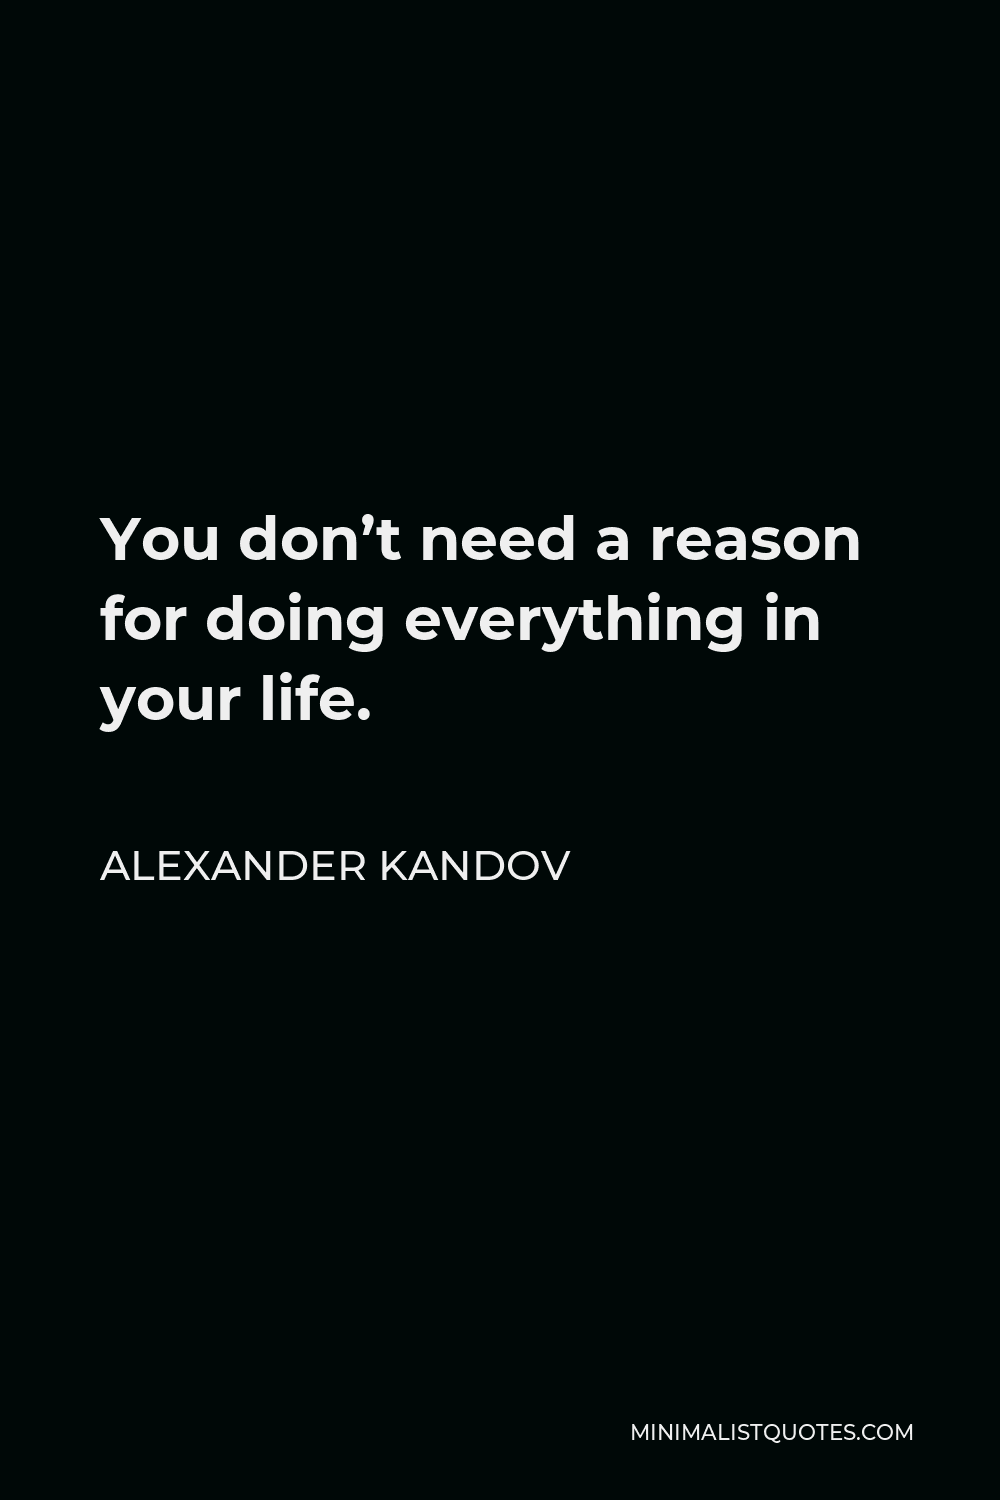 Alexander Kandov Quote - You don’t need a reason for doing everything in your life.